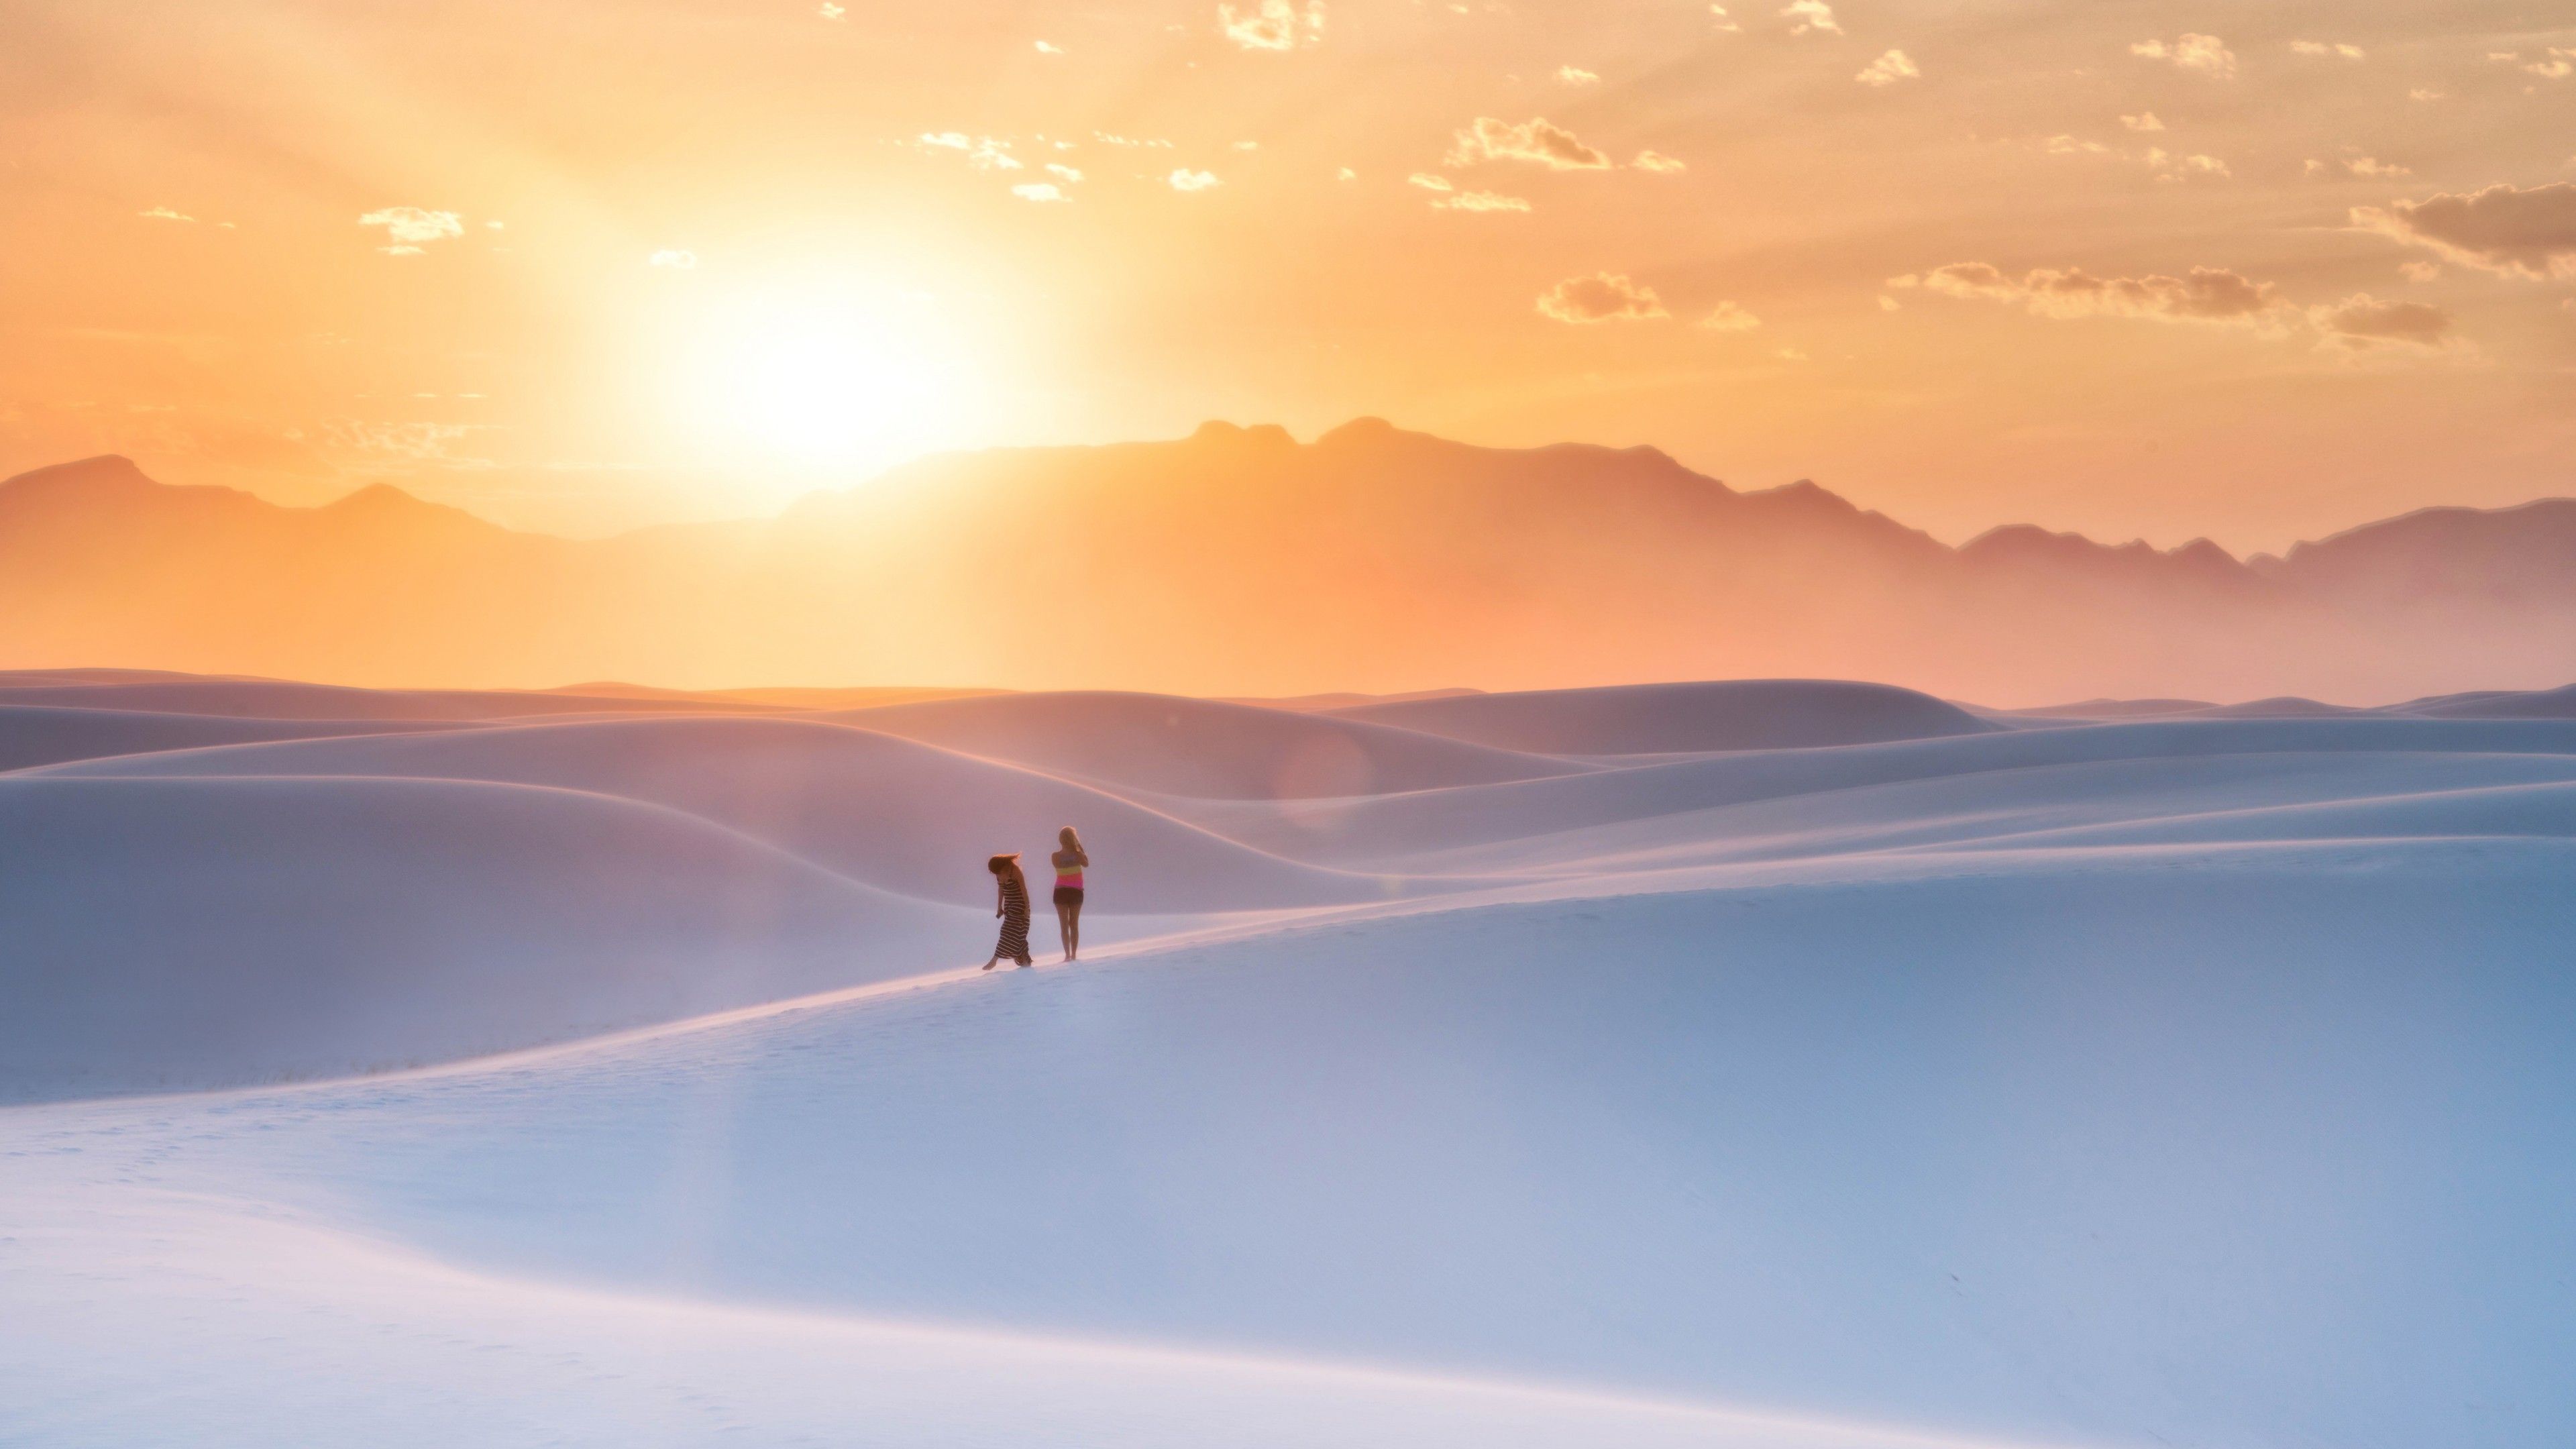 Wallpaper White Sands, Sunset, New Mexico, Sand Dunes, 5K, Nature,. Wallpaper for iPhone, Android, Mobile and Desktop